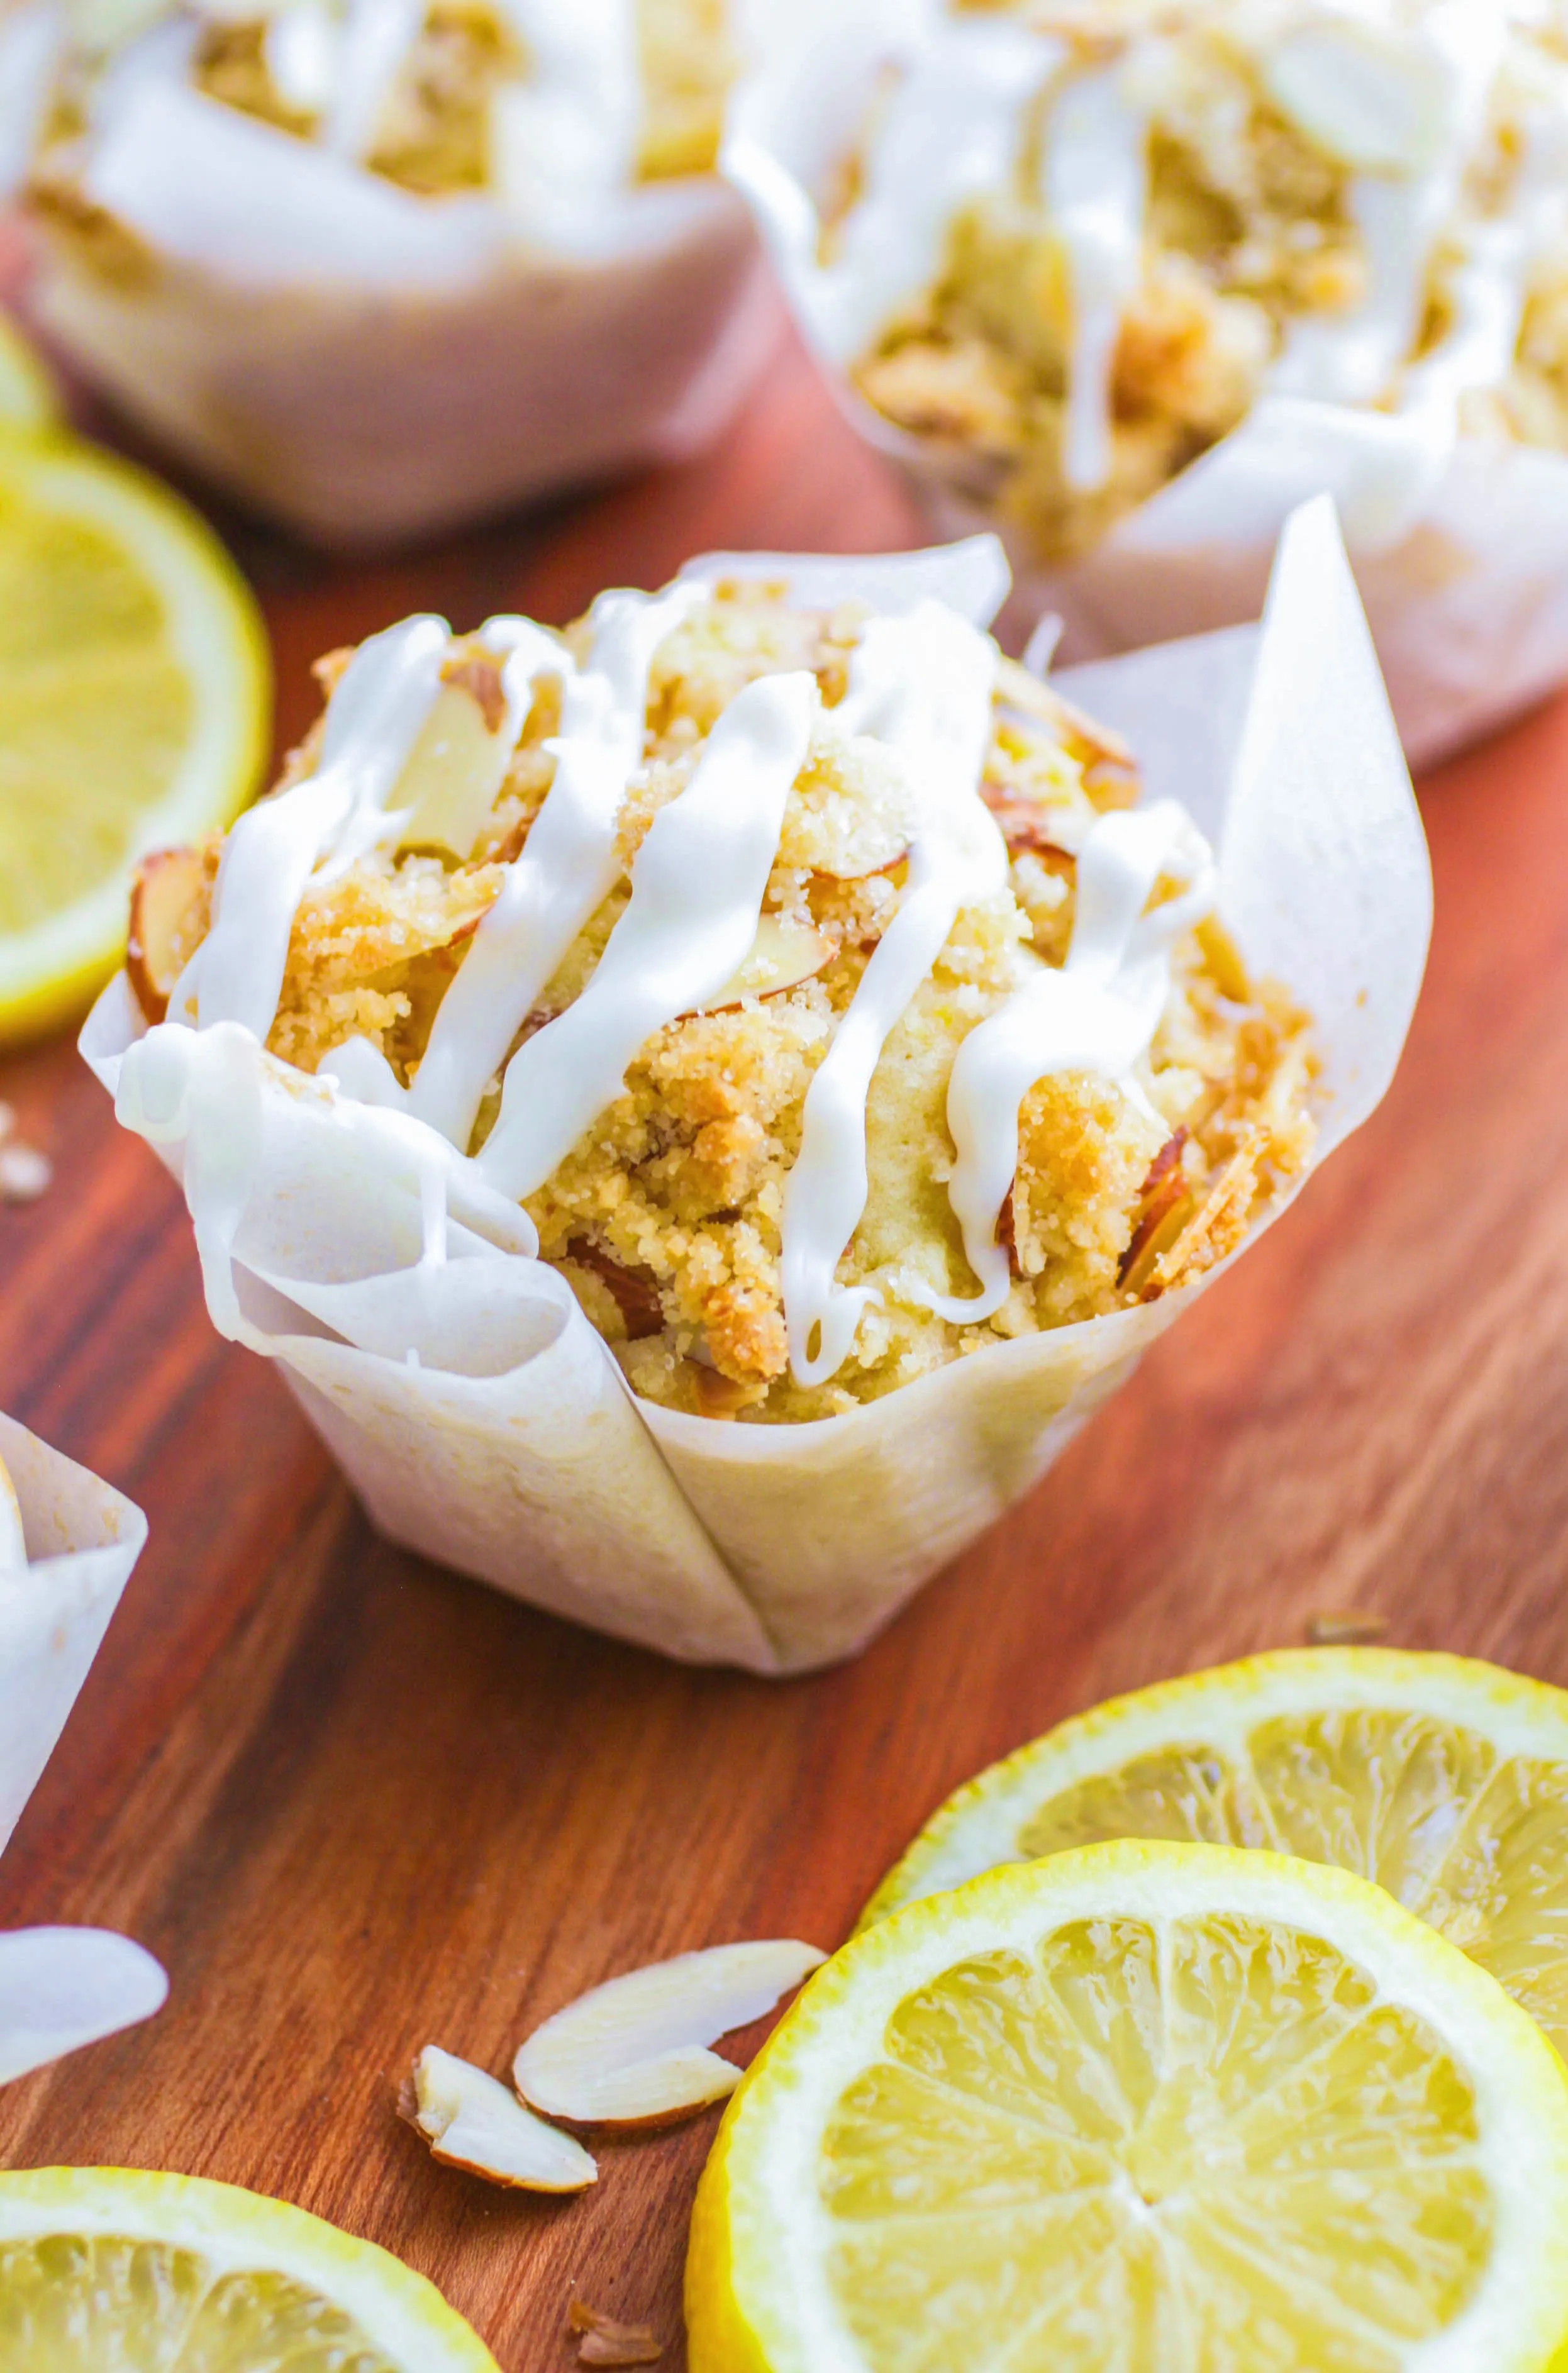 Lemon Muffins with Almond Streusel and Glaze are the perfect morning treat! These lemon muffins are delightful!